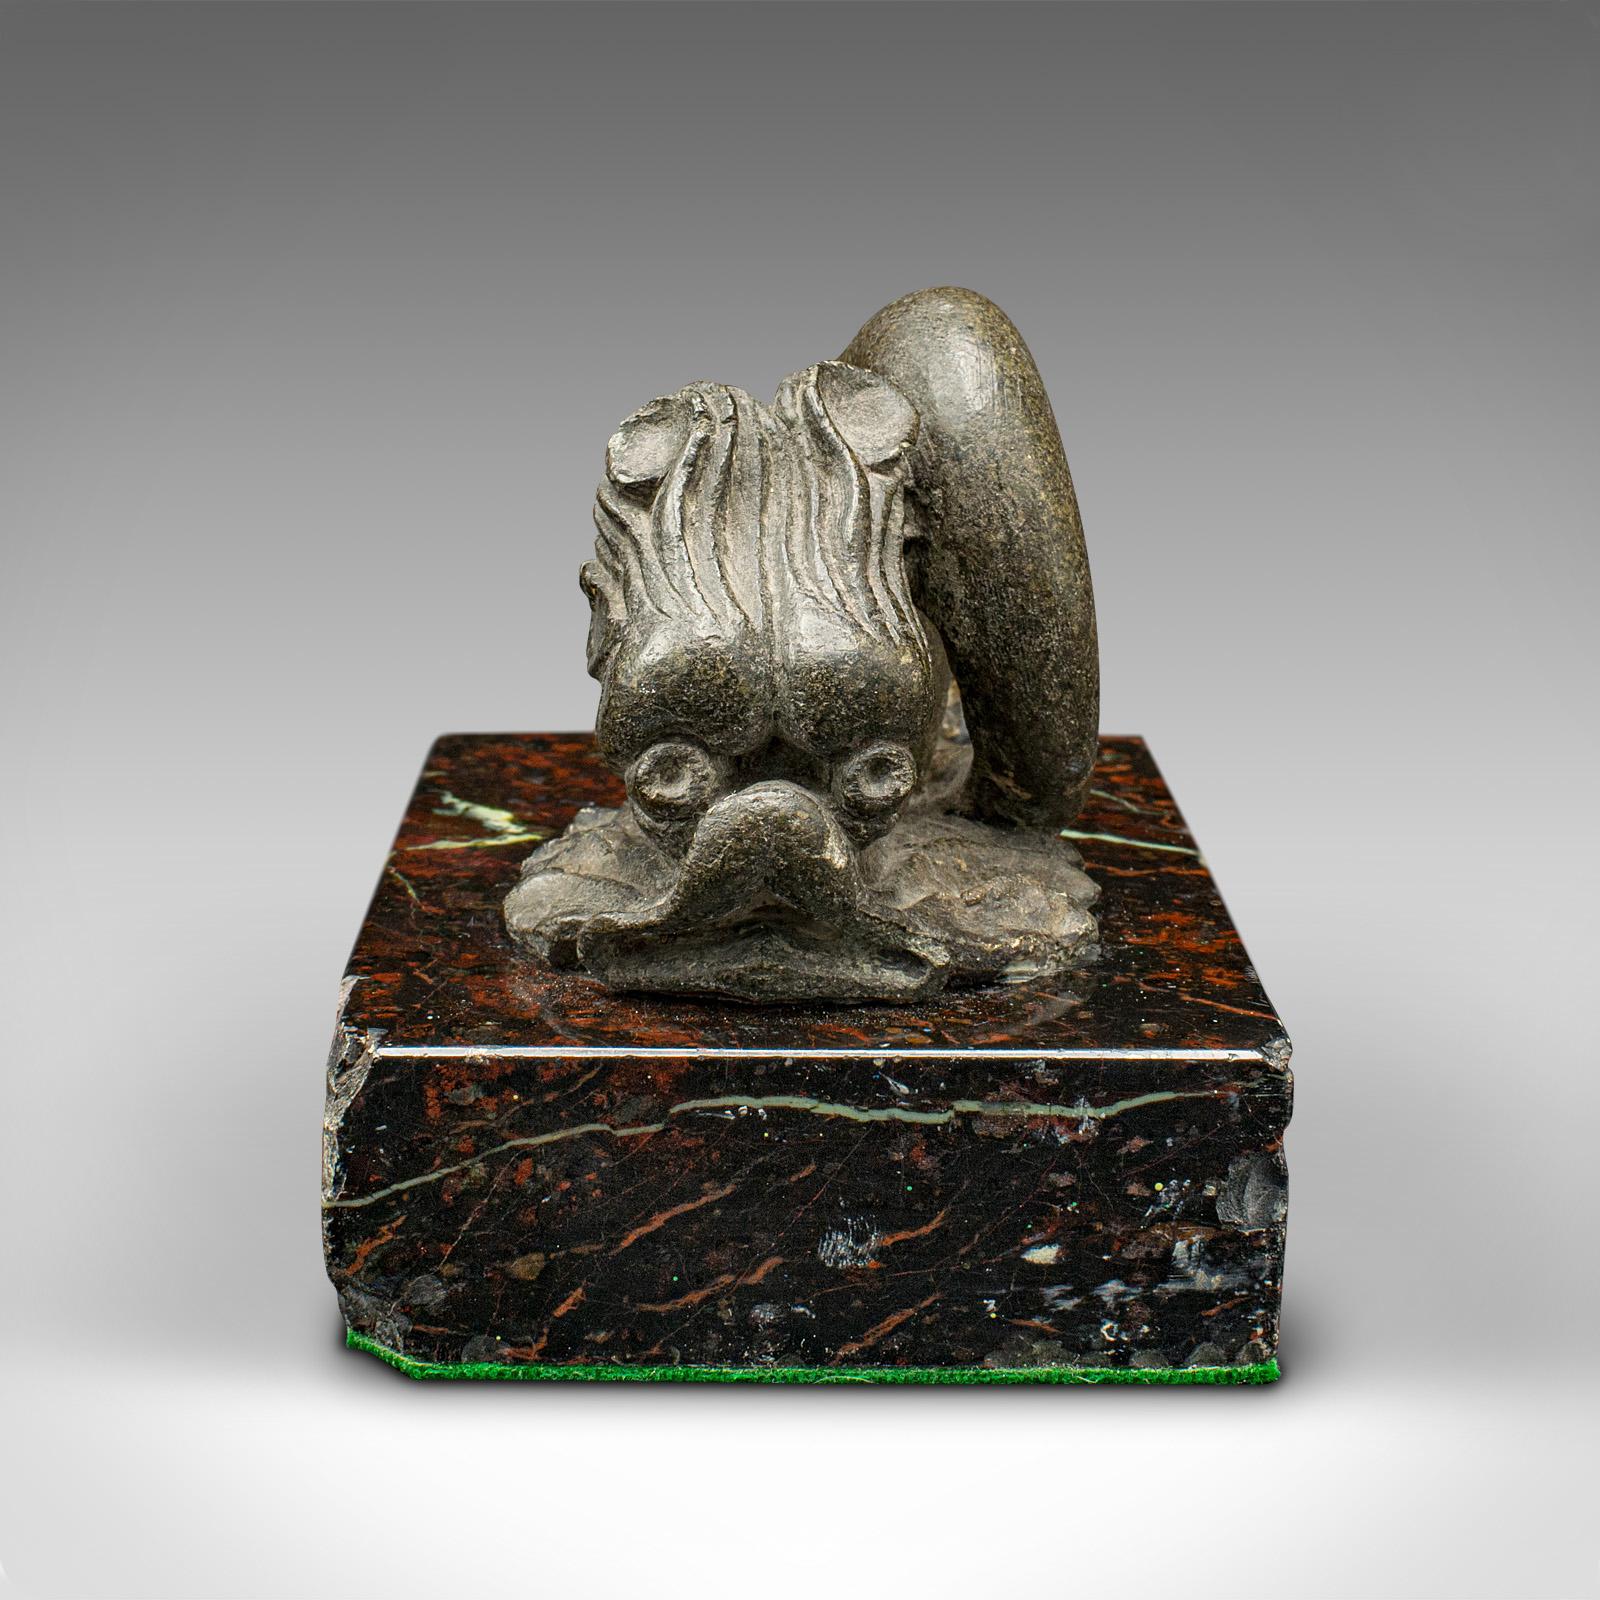 This is an antique serpentine paperweight. A Chinese, stone and marble dragon fish figure, dating to the early Victorian period, circa 1850.

Distinctive and tactile Oriental taste, with appealing originality
Displays a desirable aged patina